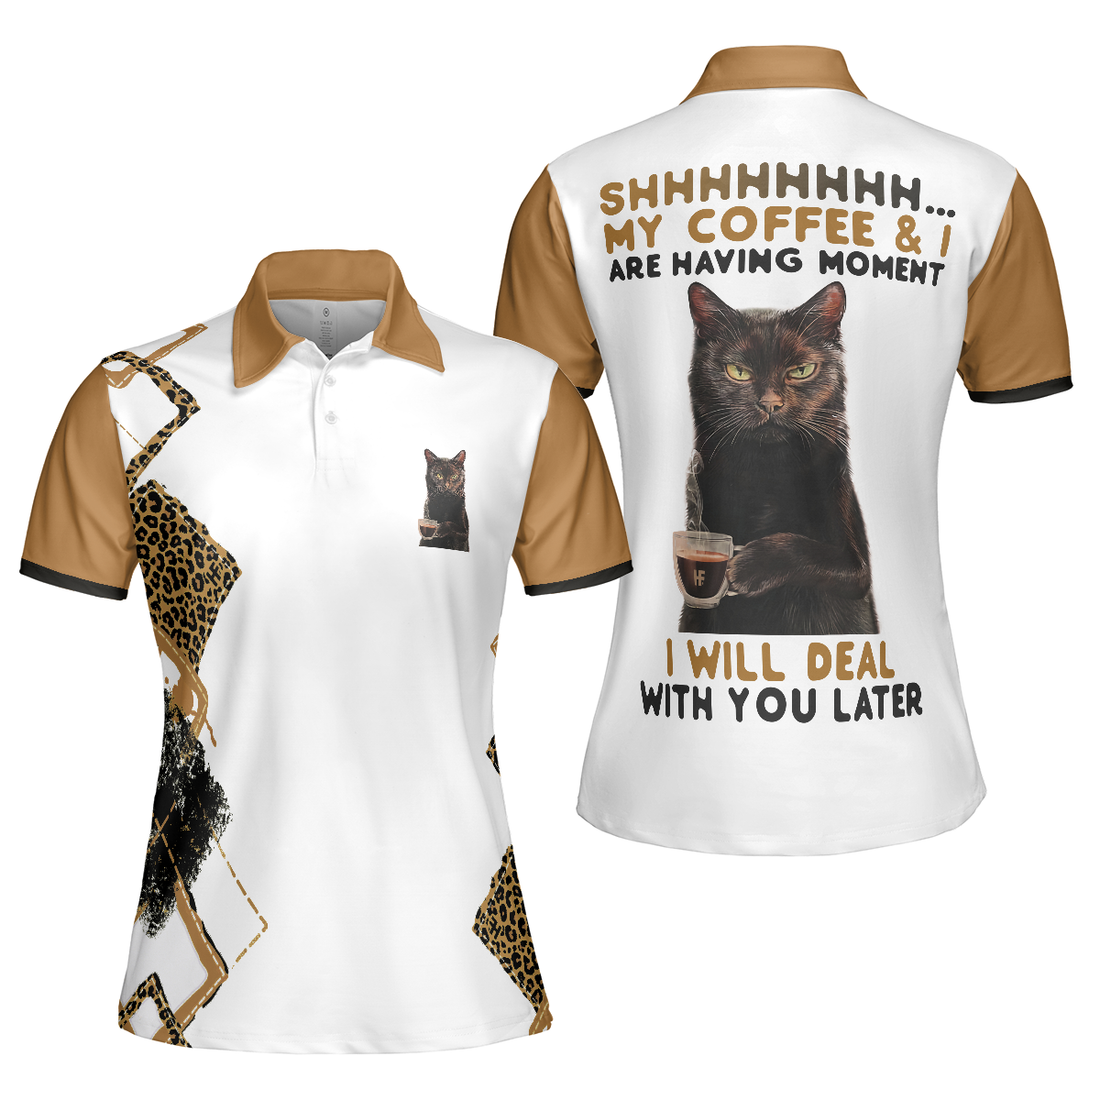 Shh My Coffee And I Are Having A Moment I Will Deal With You Later Short Sleeve Women Polo Shirt Leopard Shirt - 1